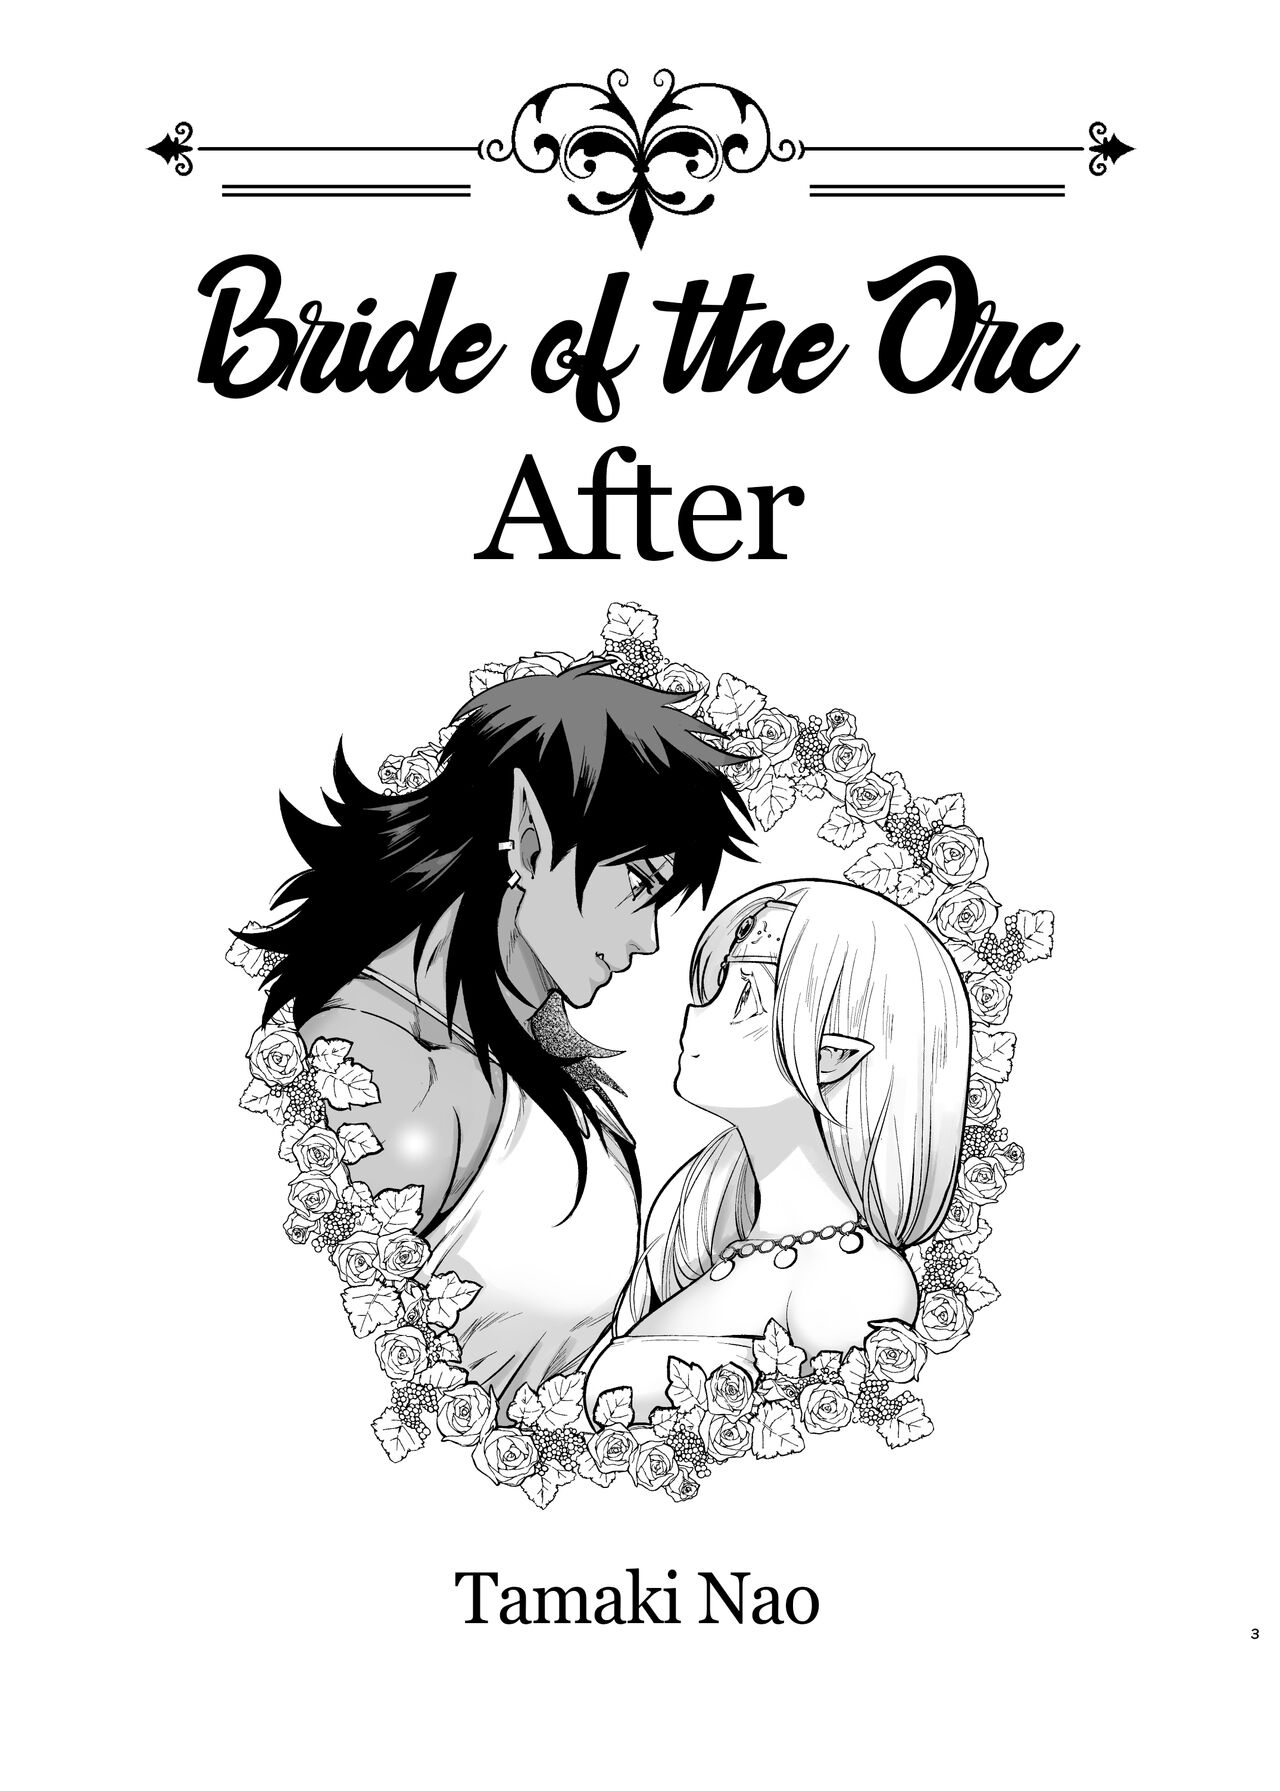 Orc no Hanayome After | Bride of the Orc After - Foto 3